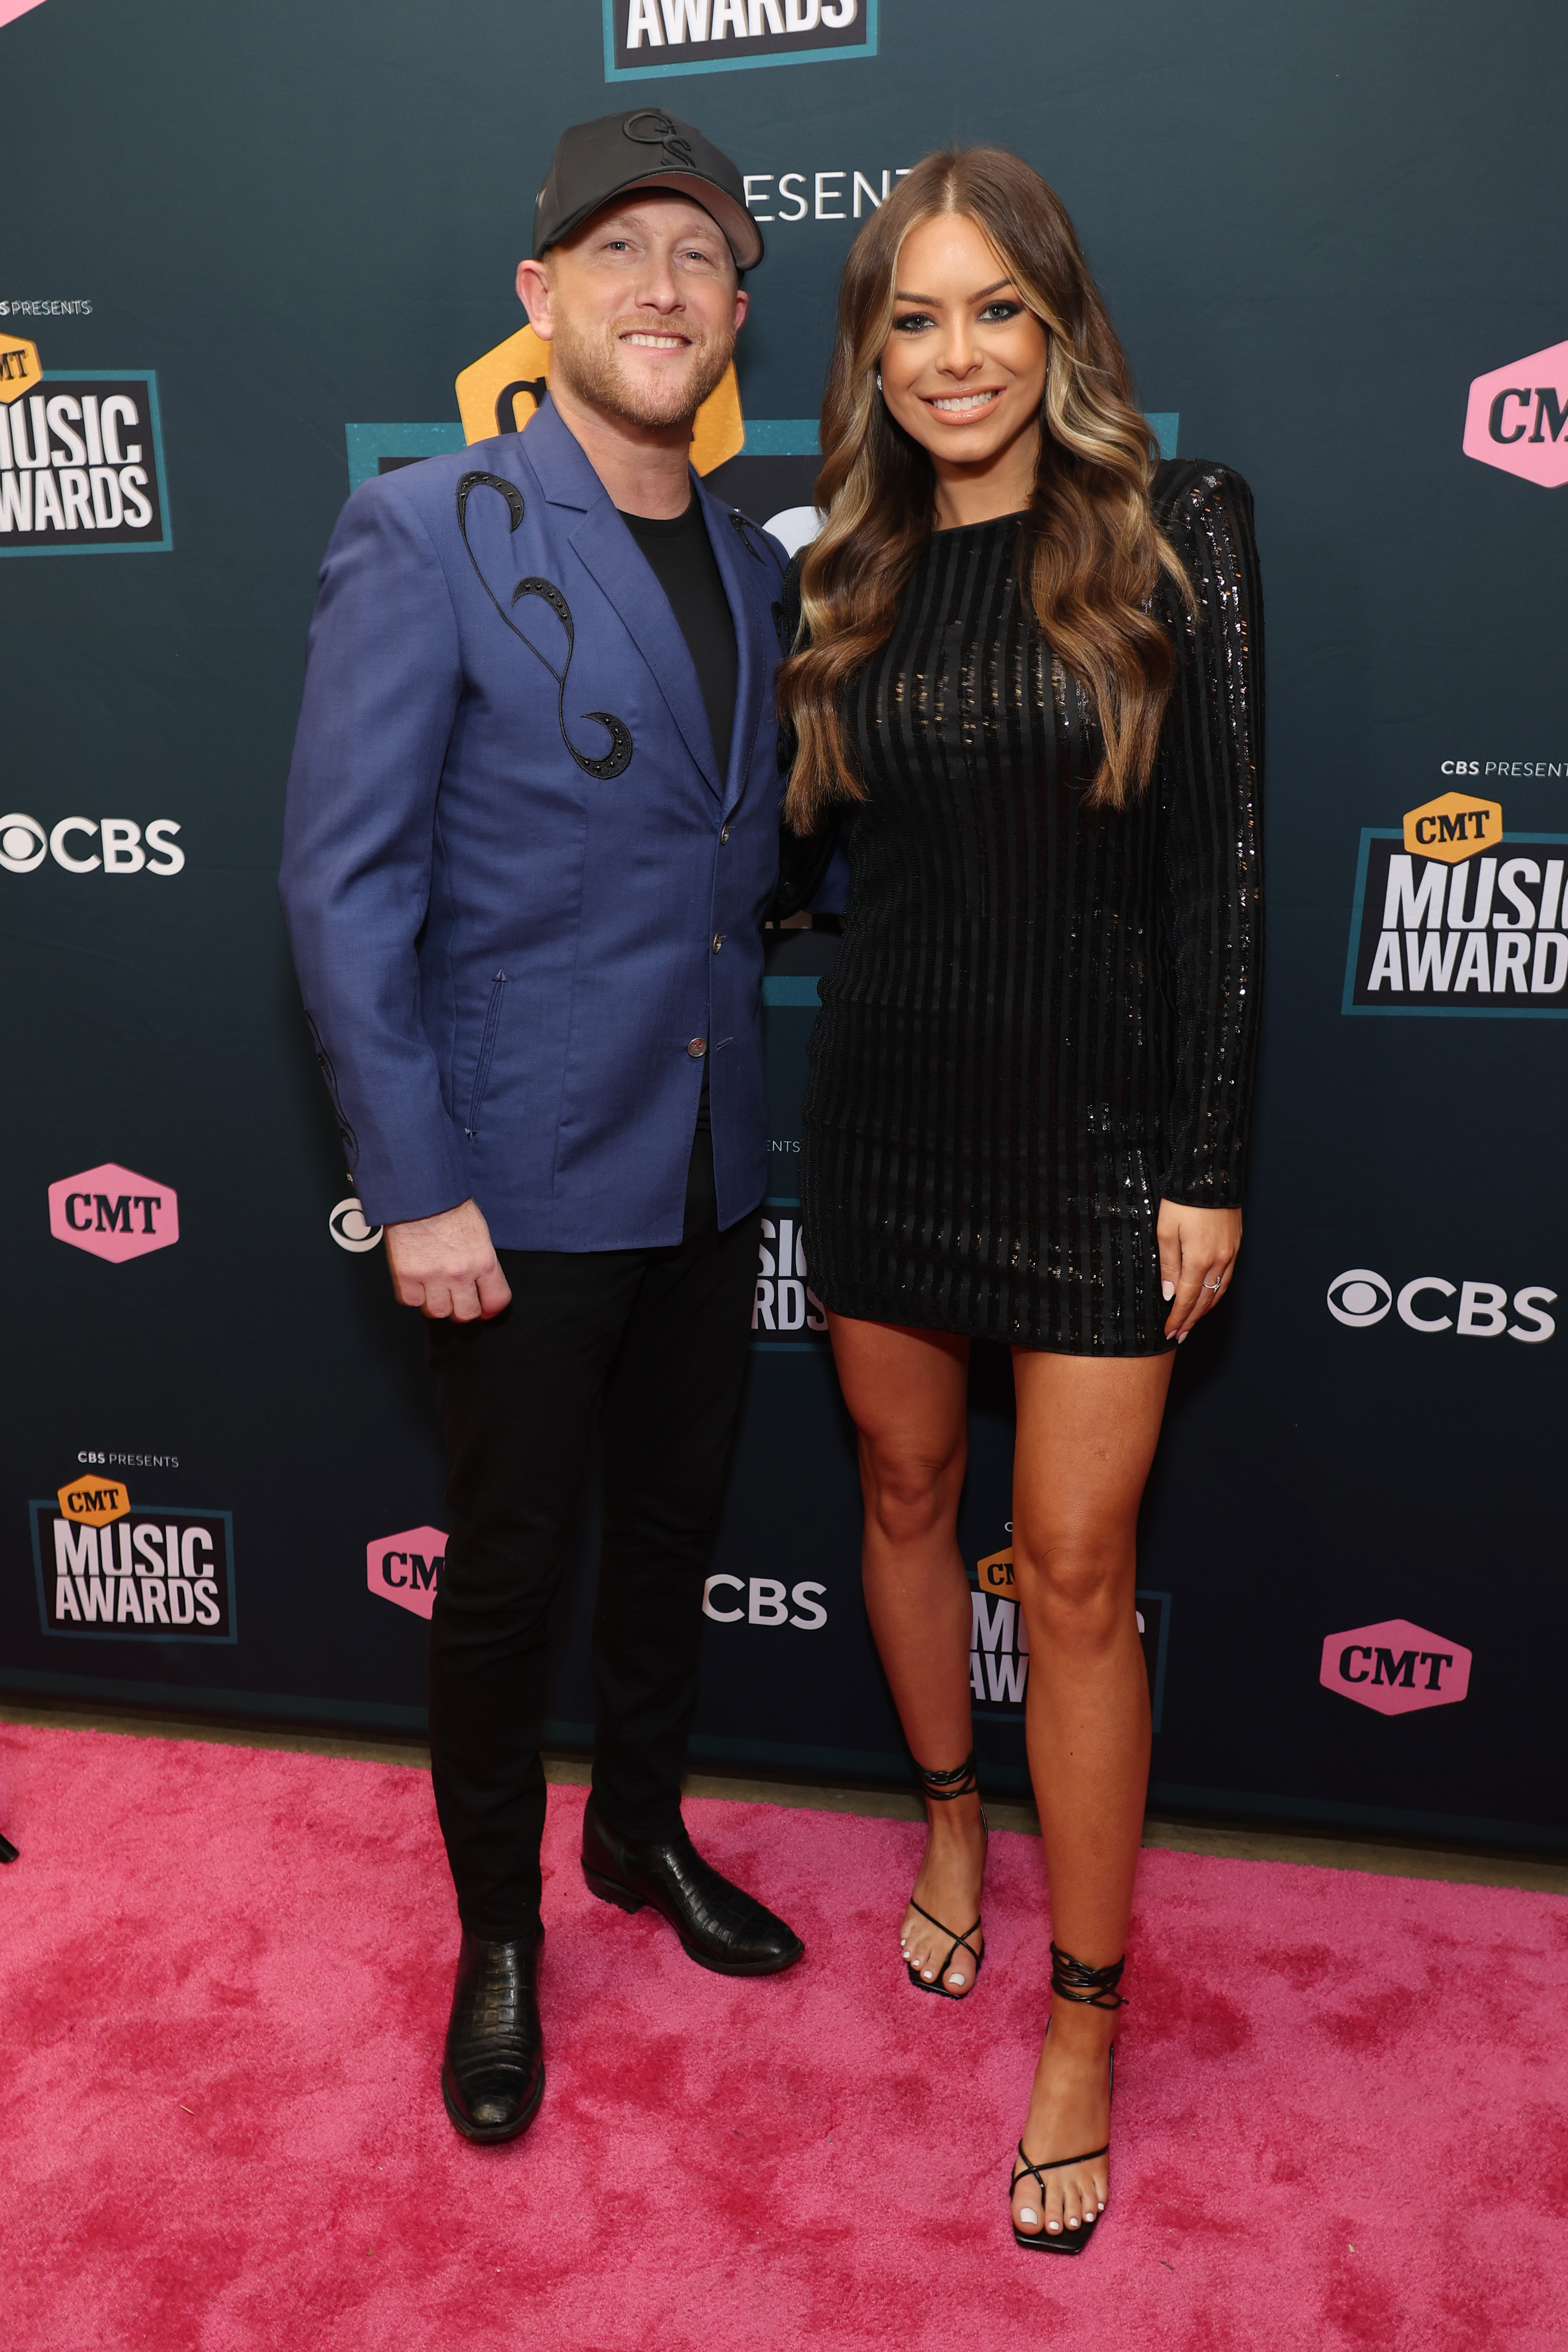 Cole Swindell and Courtney Little attend the 2022 CMT Music Awards at Nashville Municipal Auditorium, on April 11, 2022, in Nashville, Tennessee | Source: Getty Images